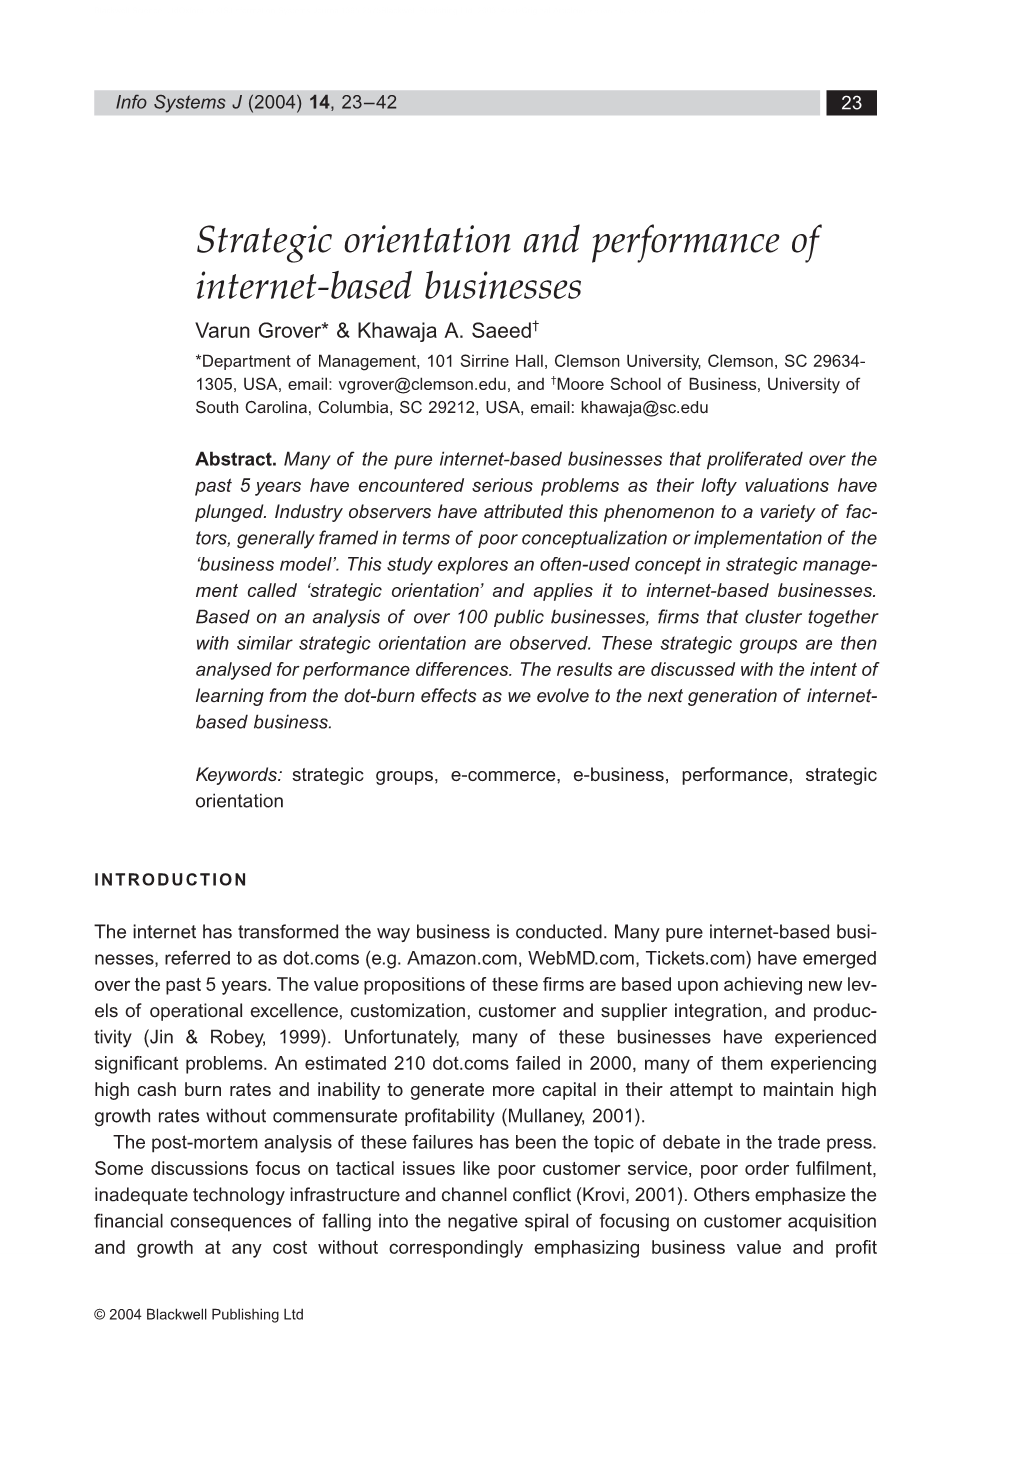 Strategic Orientation and Performance of Internet-Based Businesses Varun Grover* & Khawaja A